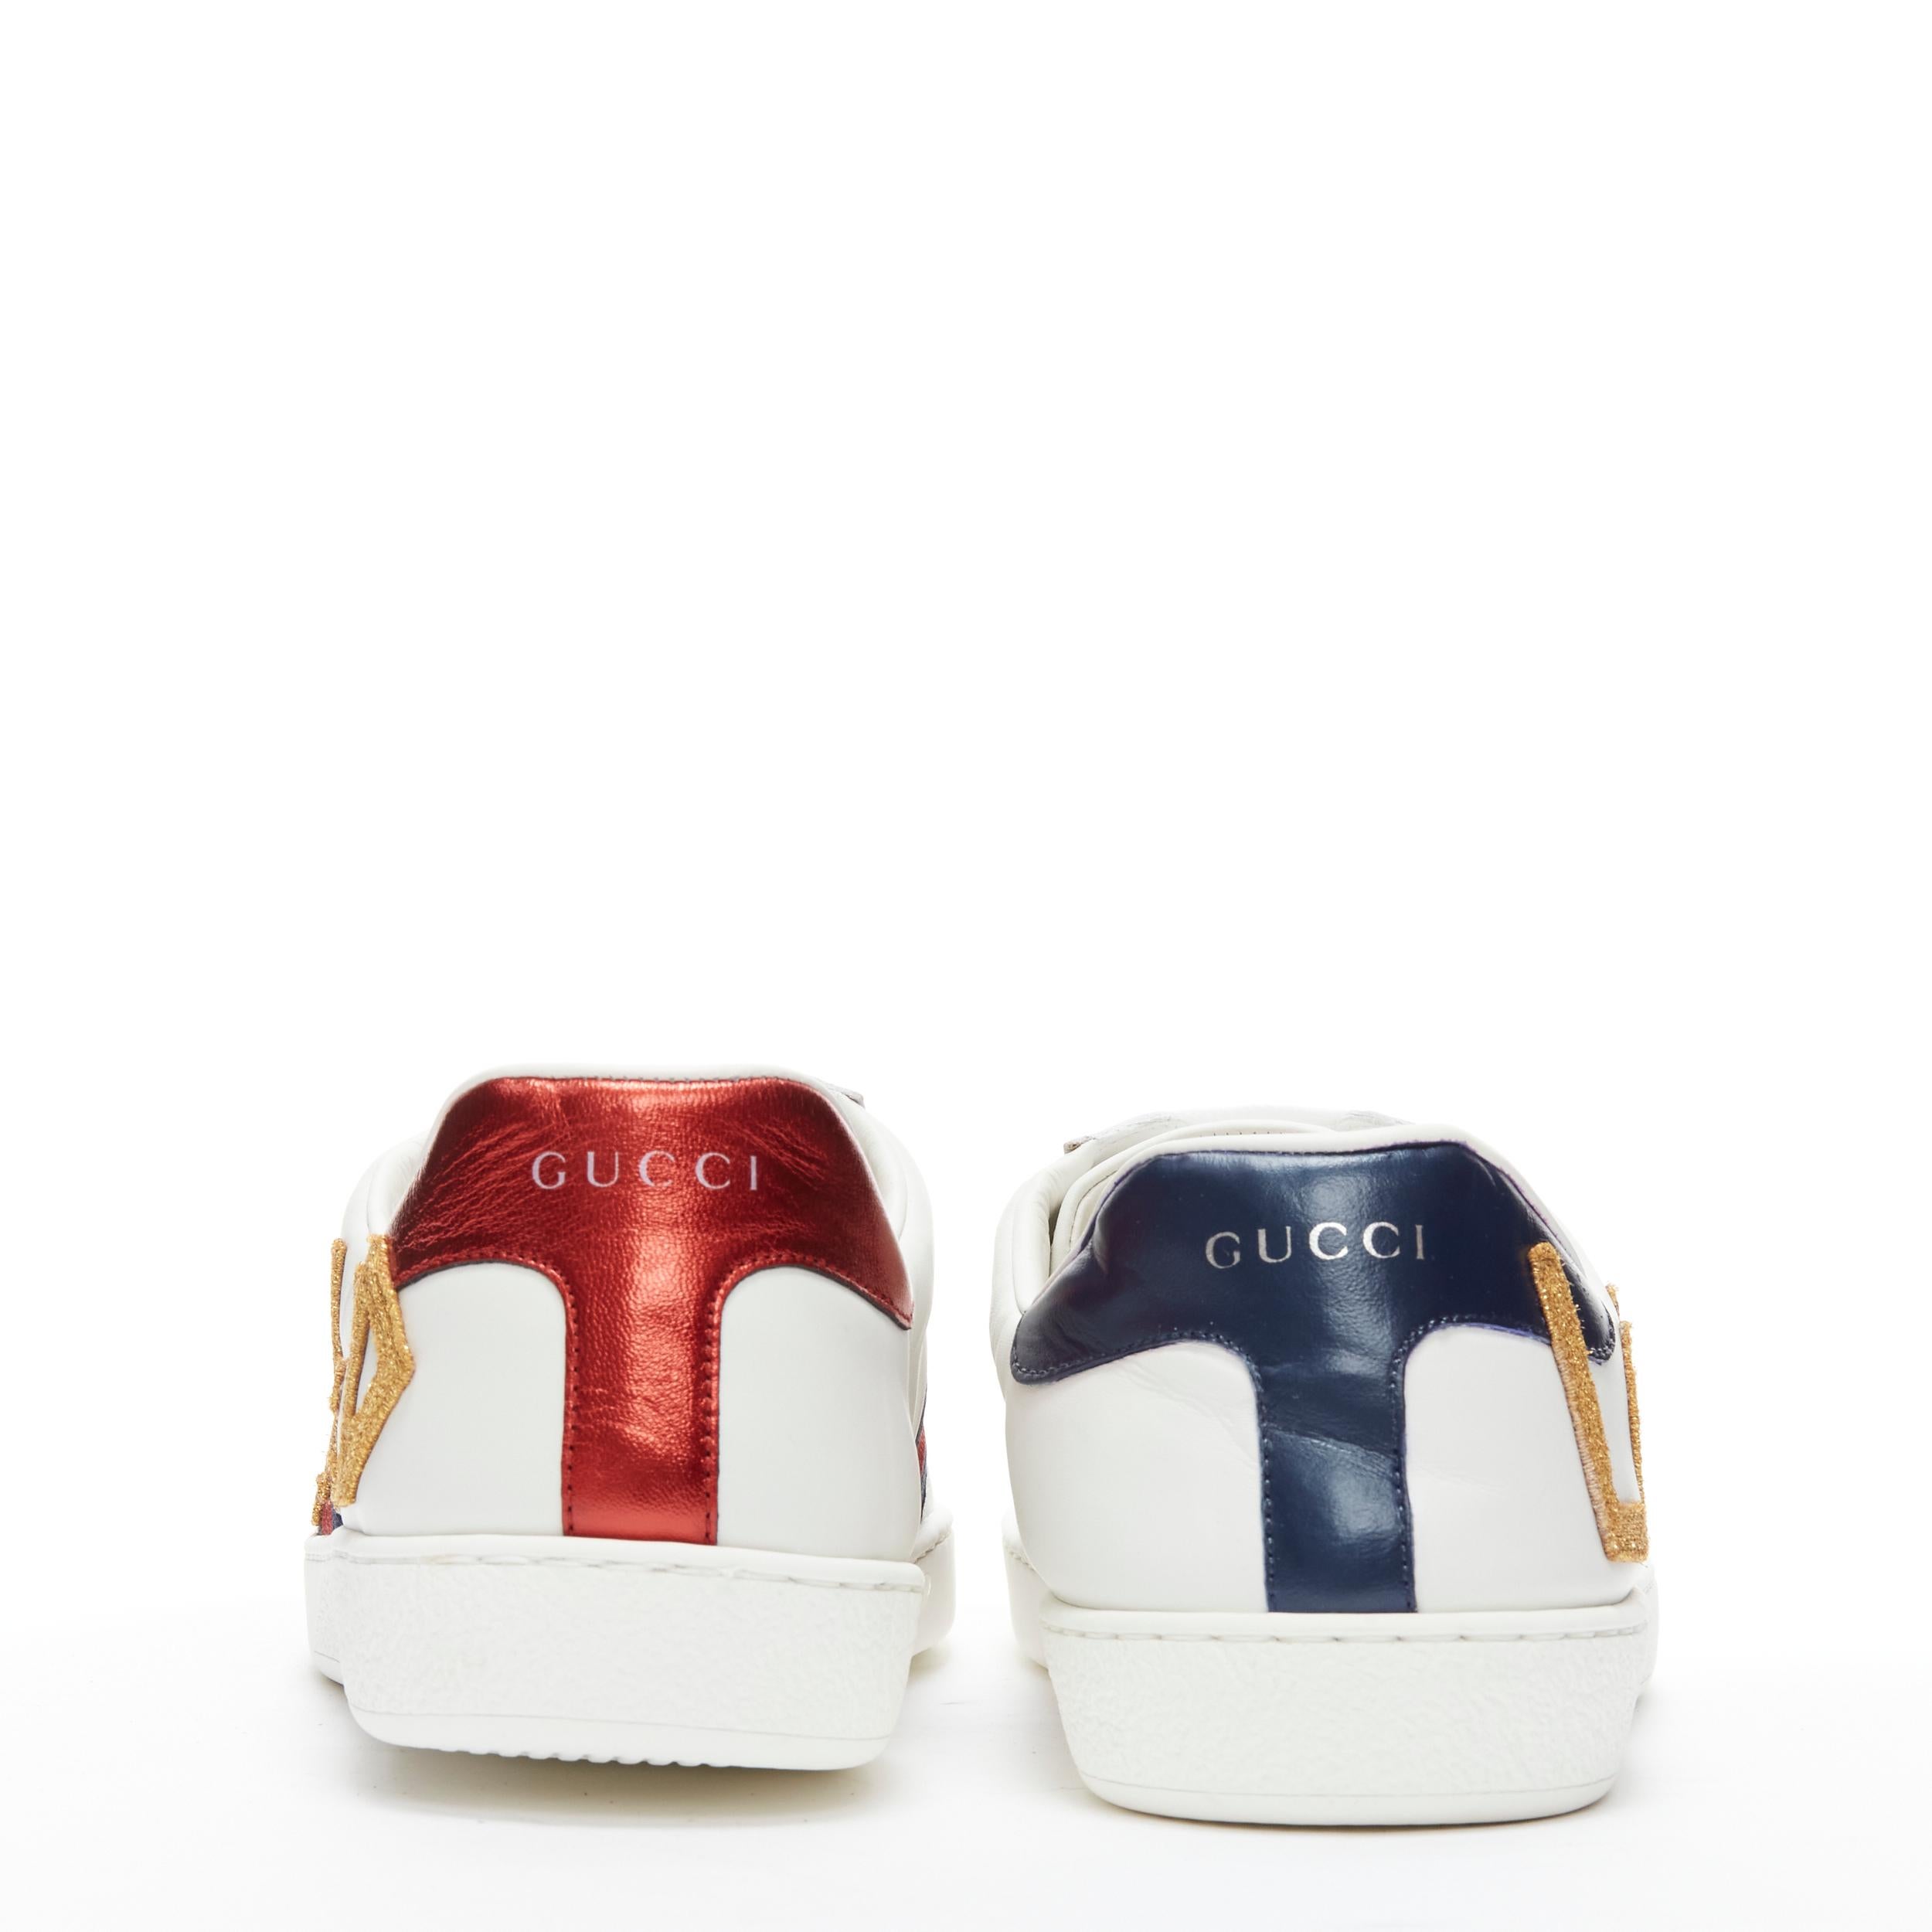 Men's GUCCI Ace Loved gold letter patchwork white navy red web sneaker UK9 EU43 For Sale